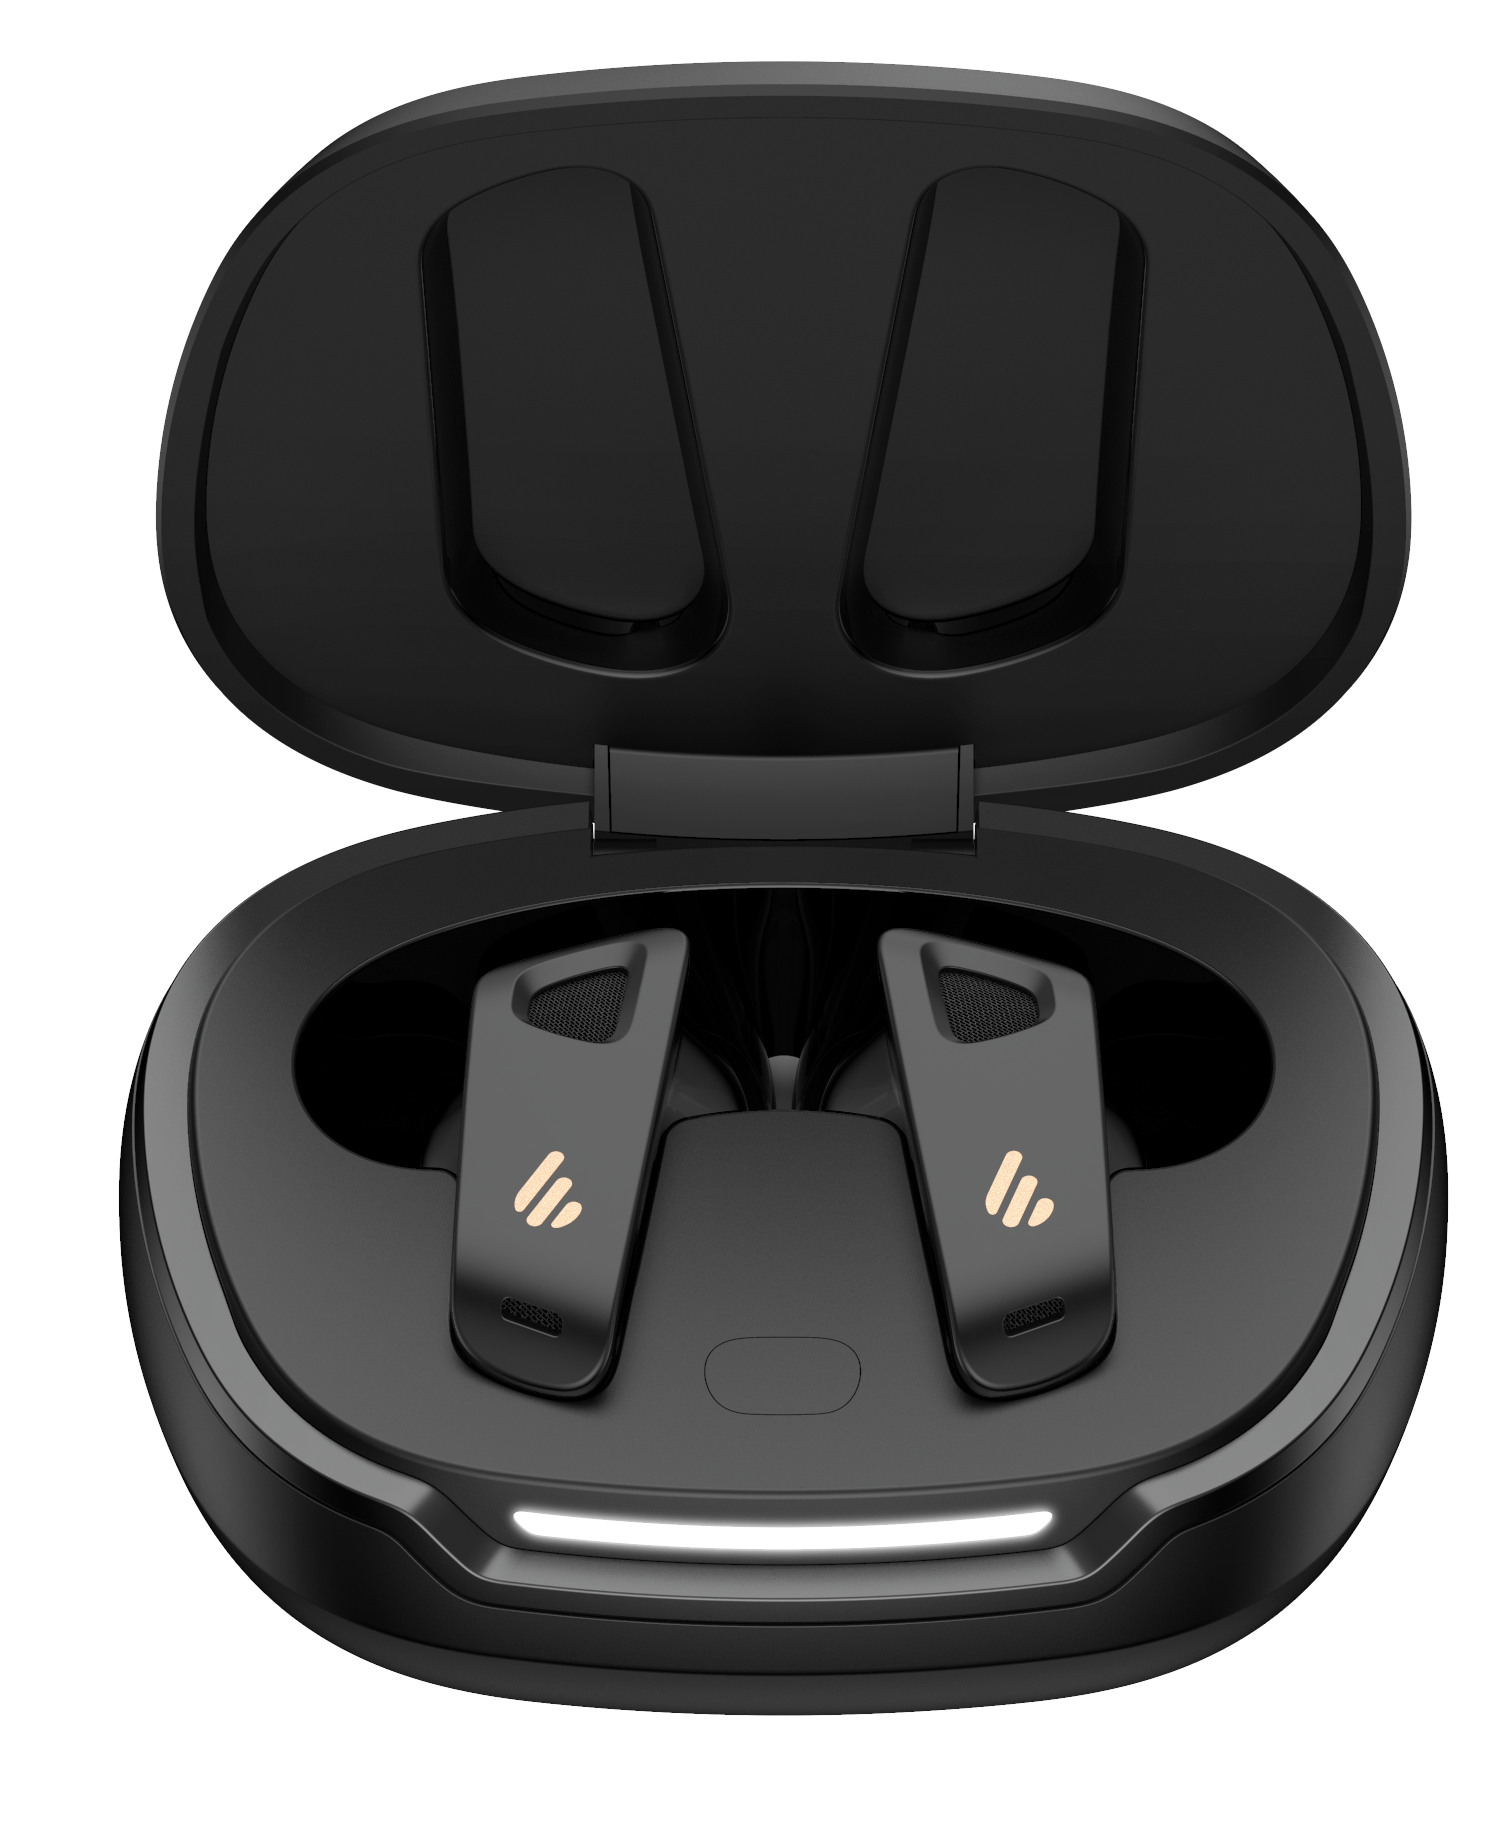 Two black earbuds in a black charging case, both branded with Edifier's logo.